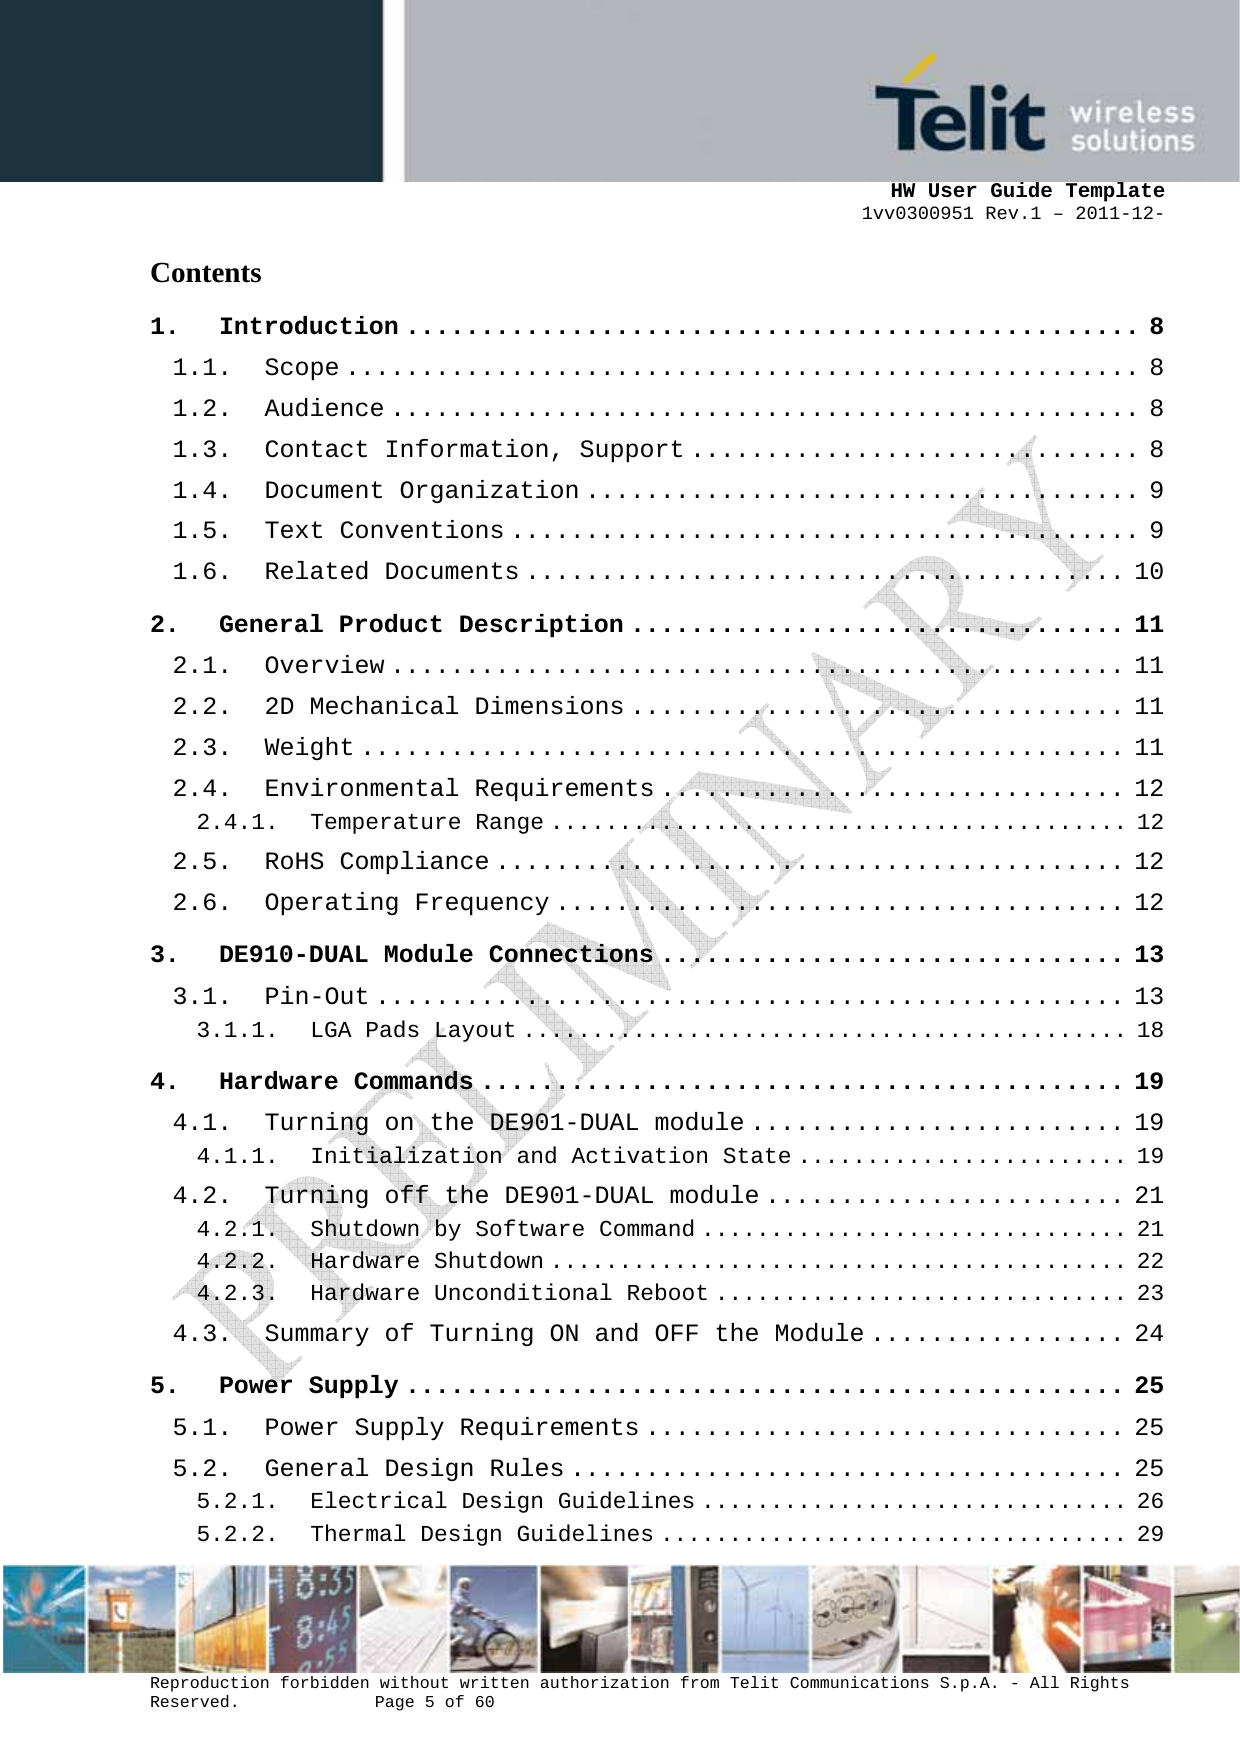      HW User Guide Template 1vv0300951 Rev.1 – 2011-12-  Reproduction forbidden without written authorization from Telit Communications S.p.A. - All Rights Reserved.    Page 5 of 60                                                     Contents 1. Introduction ................................................. 8 1.1. Scope ..................................................... 8 1.2. Audience .................................................. 8 1.3. Contact Information, Support .............................. 8 1.4. Document Organization ..................................... 9 1.5. Text Conventions .......................................... 9 1.6. Related Documents ........................................ 10 2. General Product Description ................................. 11 2.1. Overview ................................................. 11 2.2. 2D Mechanical Dimensions ................................. 11 2.3. Weight ................................................... 11 2.4. Environmental Requirements ............................... 12 2.4.1. Temperature Range .......................................... 12 2.5. RoHS Compliance .......................................... 12 2.6. Operating Frequency ...................................... 12 3. DE910-DUAL Module Connections ............................... 13 3.1. Pin-Out .................................................. 13 3.1.1. LGA Pads Layout ............................................ 18 4. Hardware Commands ........................................... 19 4.1. Turning on the DE901-DUAL module ......................... 19 4.1.1. Initialization and Activation State ........................ 19 4.2. Turning off the DE901-DUAL module ........................ 21 4.2.1. Shutdown by Software Command ............................... 21 4.2.2. Hardware Shutdown .......................................... 22 4.2.3. Hardware Unconditional Reboot .............................. 23 4.3. Summary of Turning ON and OFF the Module ................. 24 5. Power Supply ................................................ 25 5.1. Power Supply Requirements ................................ 25 5.2. General Design Rules ..................................... 25 5.2.1. Electrical Design Guidelines ............................... 26 5.2.2. Thermal Design Guidelines .................................. 29 